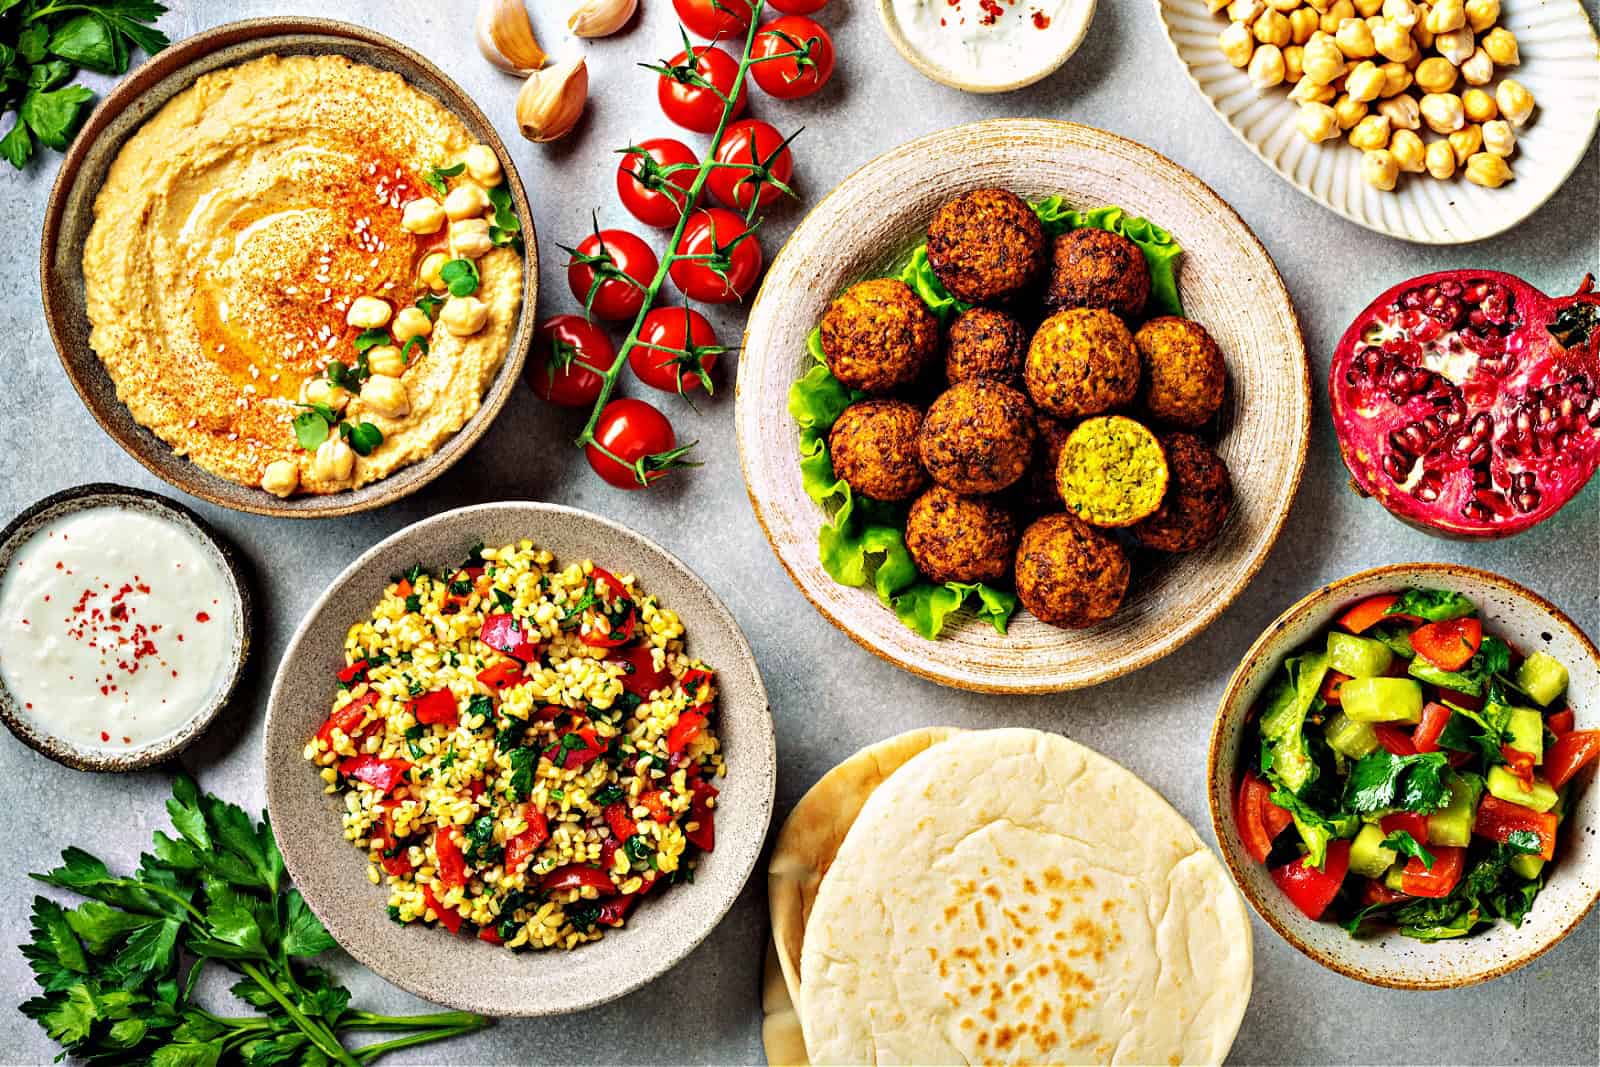 falafel, hummus, tabouleh, pita and vegetables on a concrete background, view from above